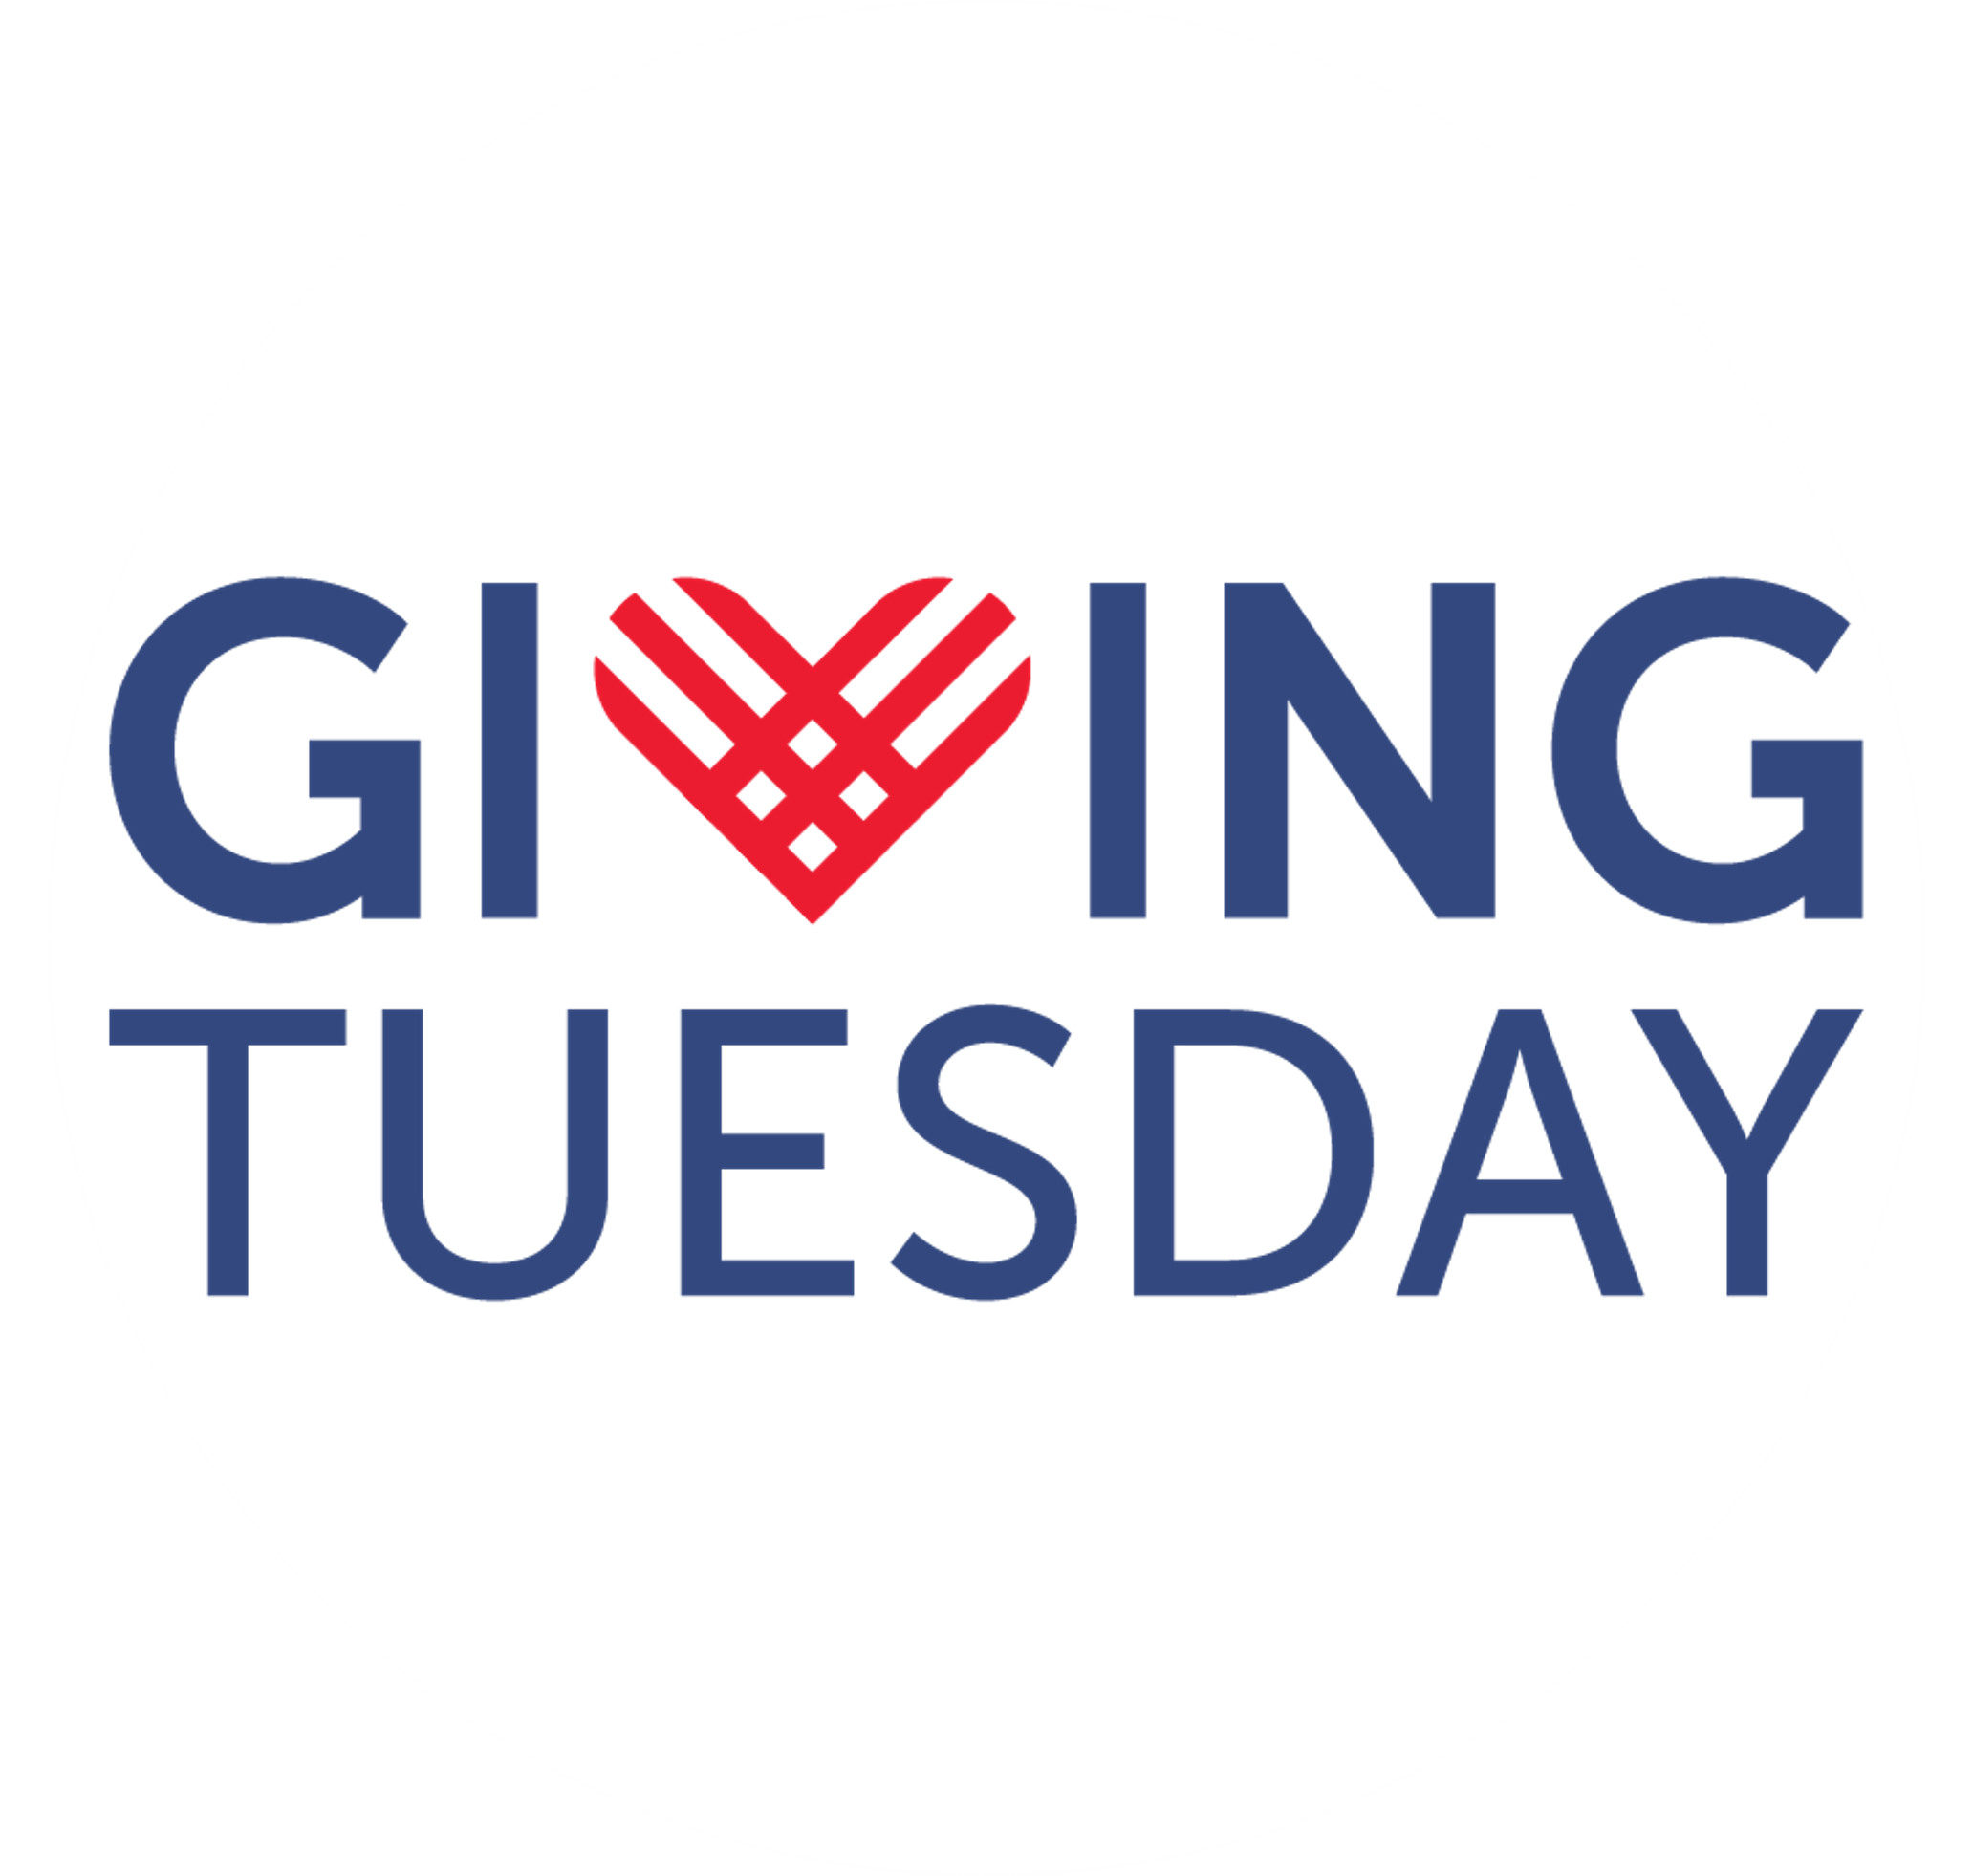 Giving Tuesday Logo in Circle Format